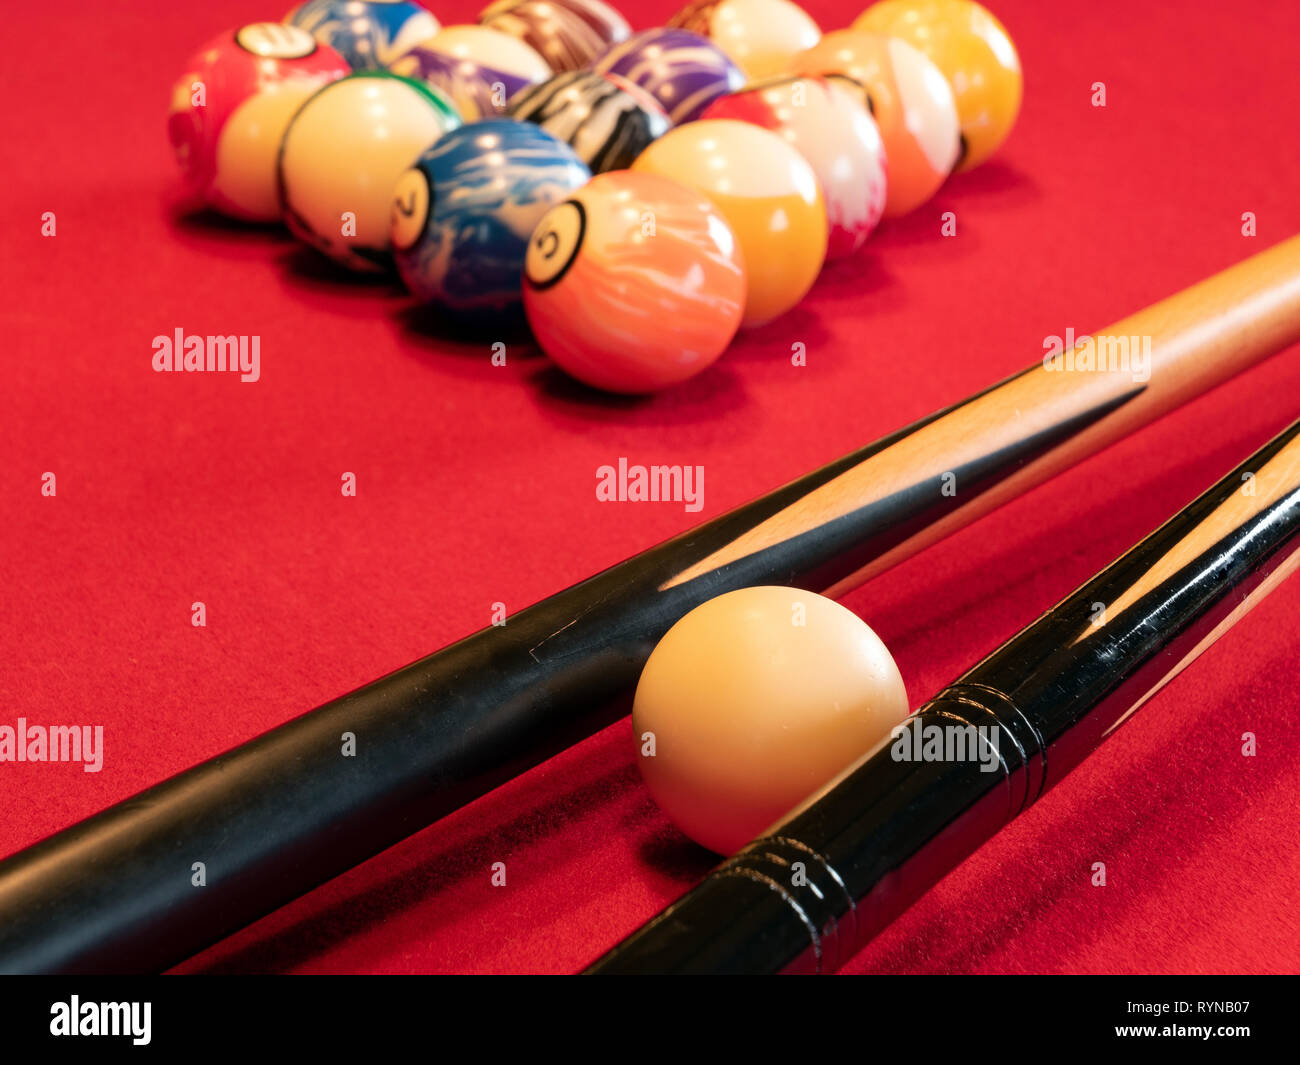 Pool table with cues and balls Stock Photo